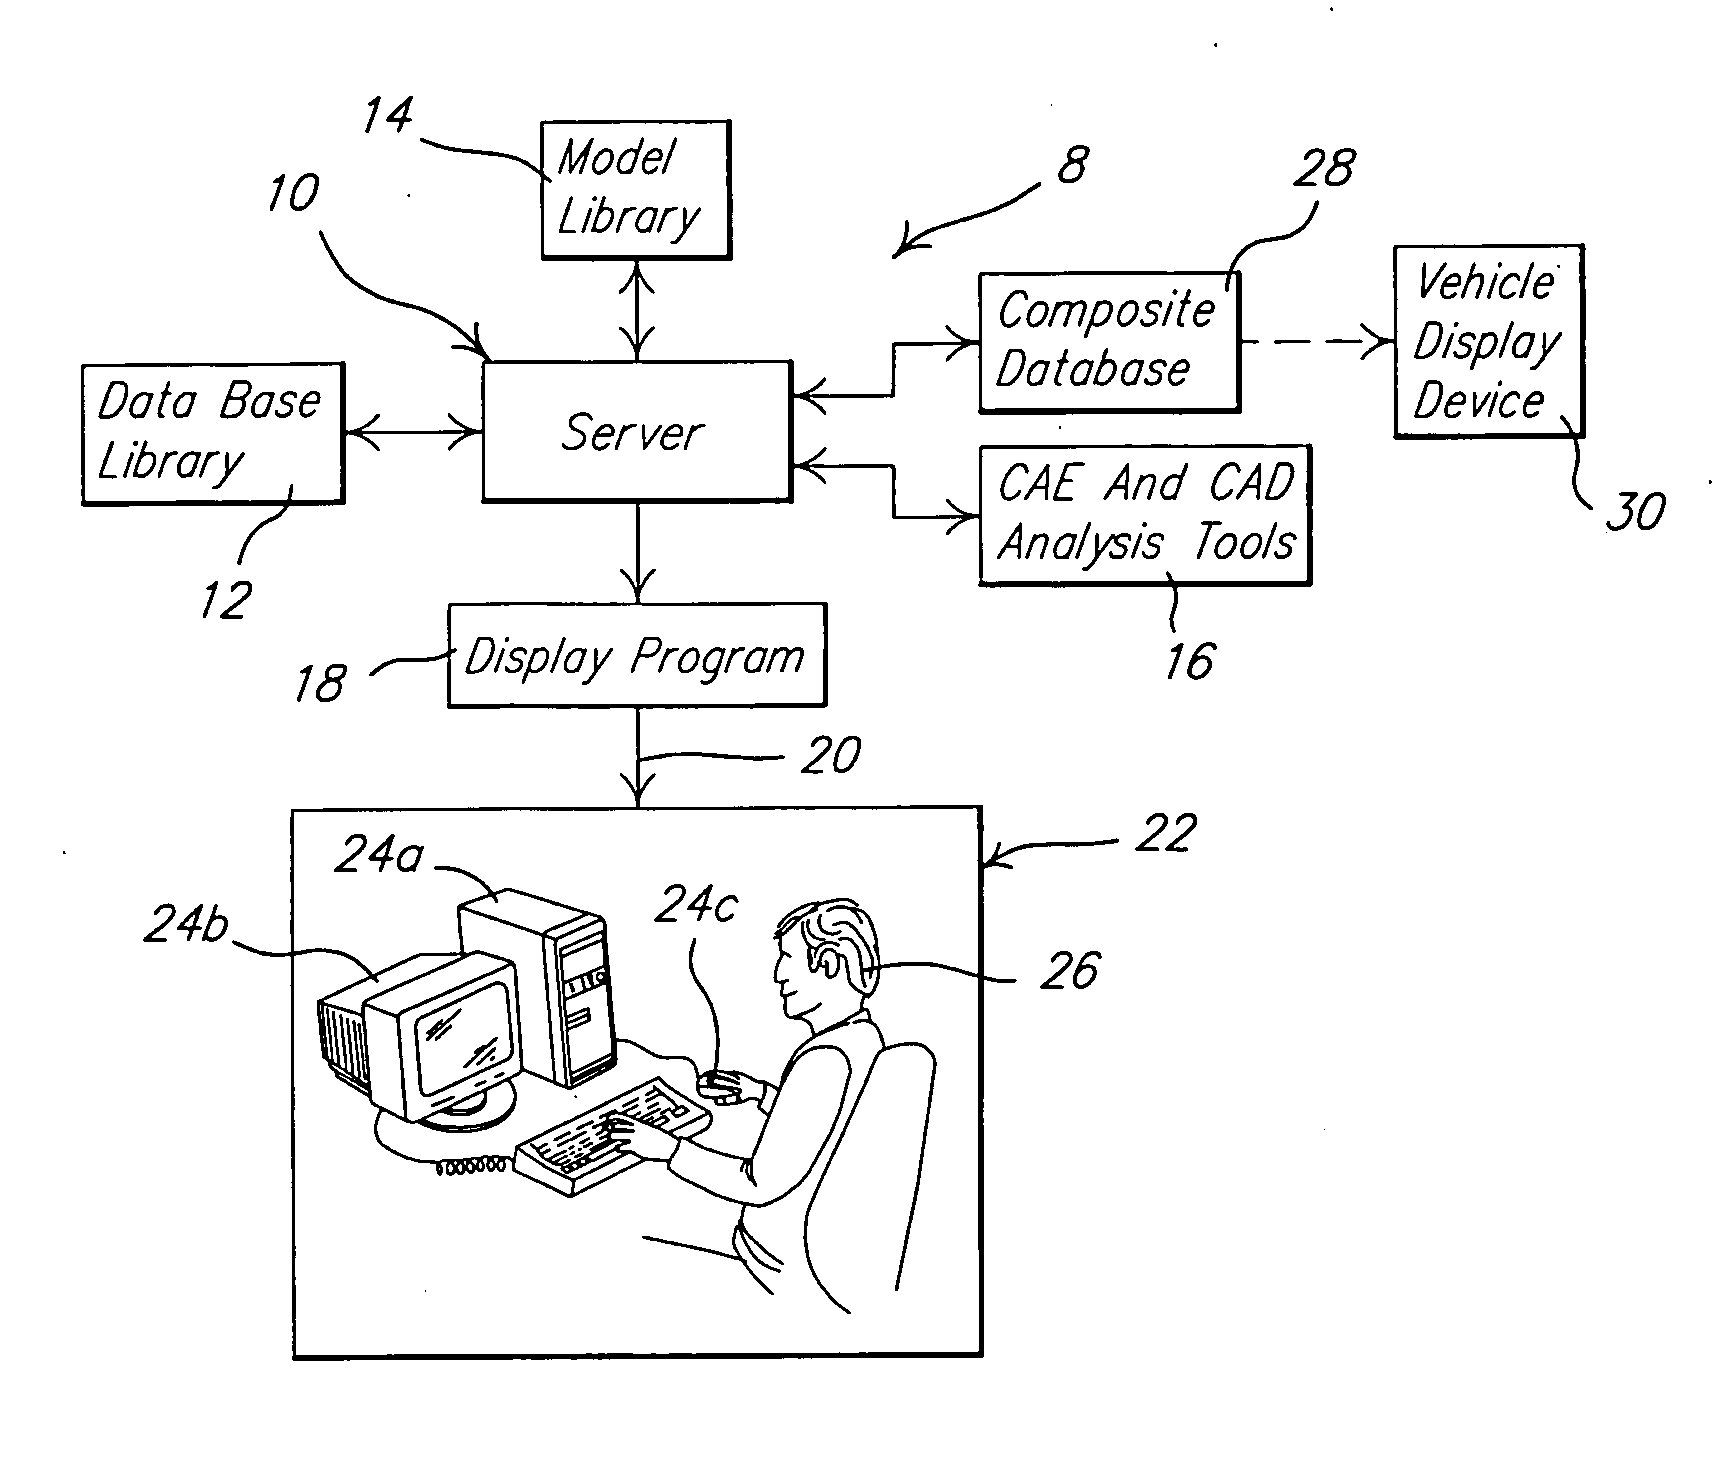 System and method of interactively compiling a database for an in-vehicle display device